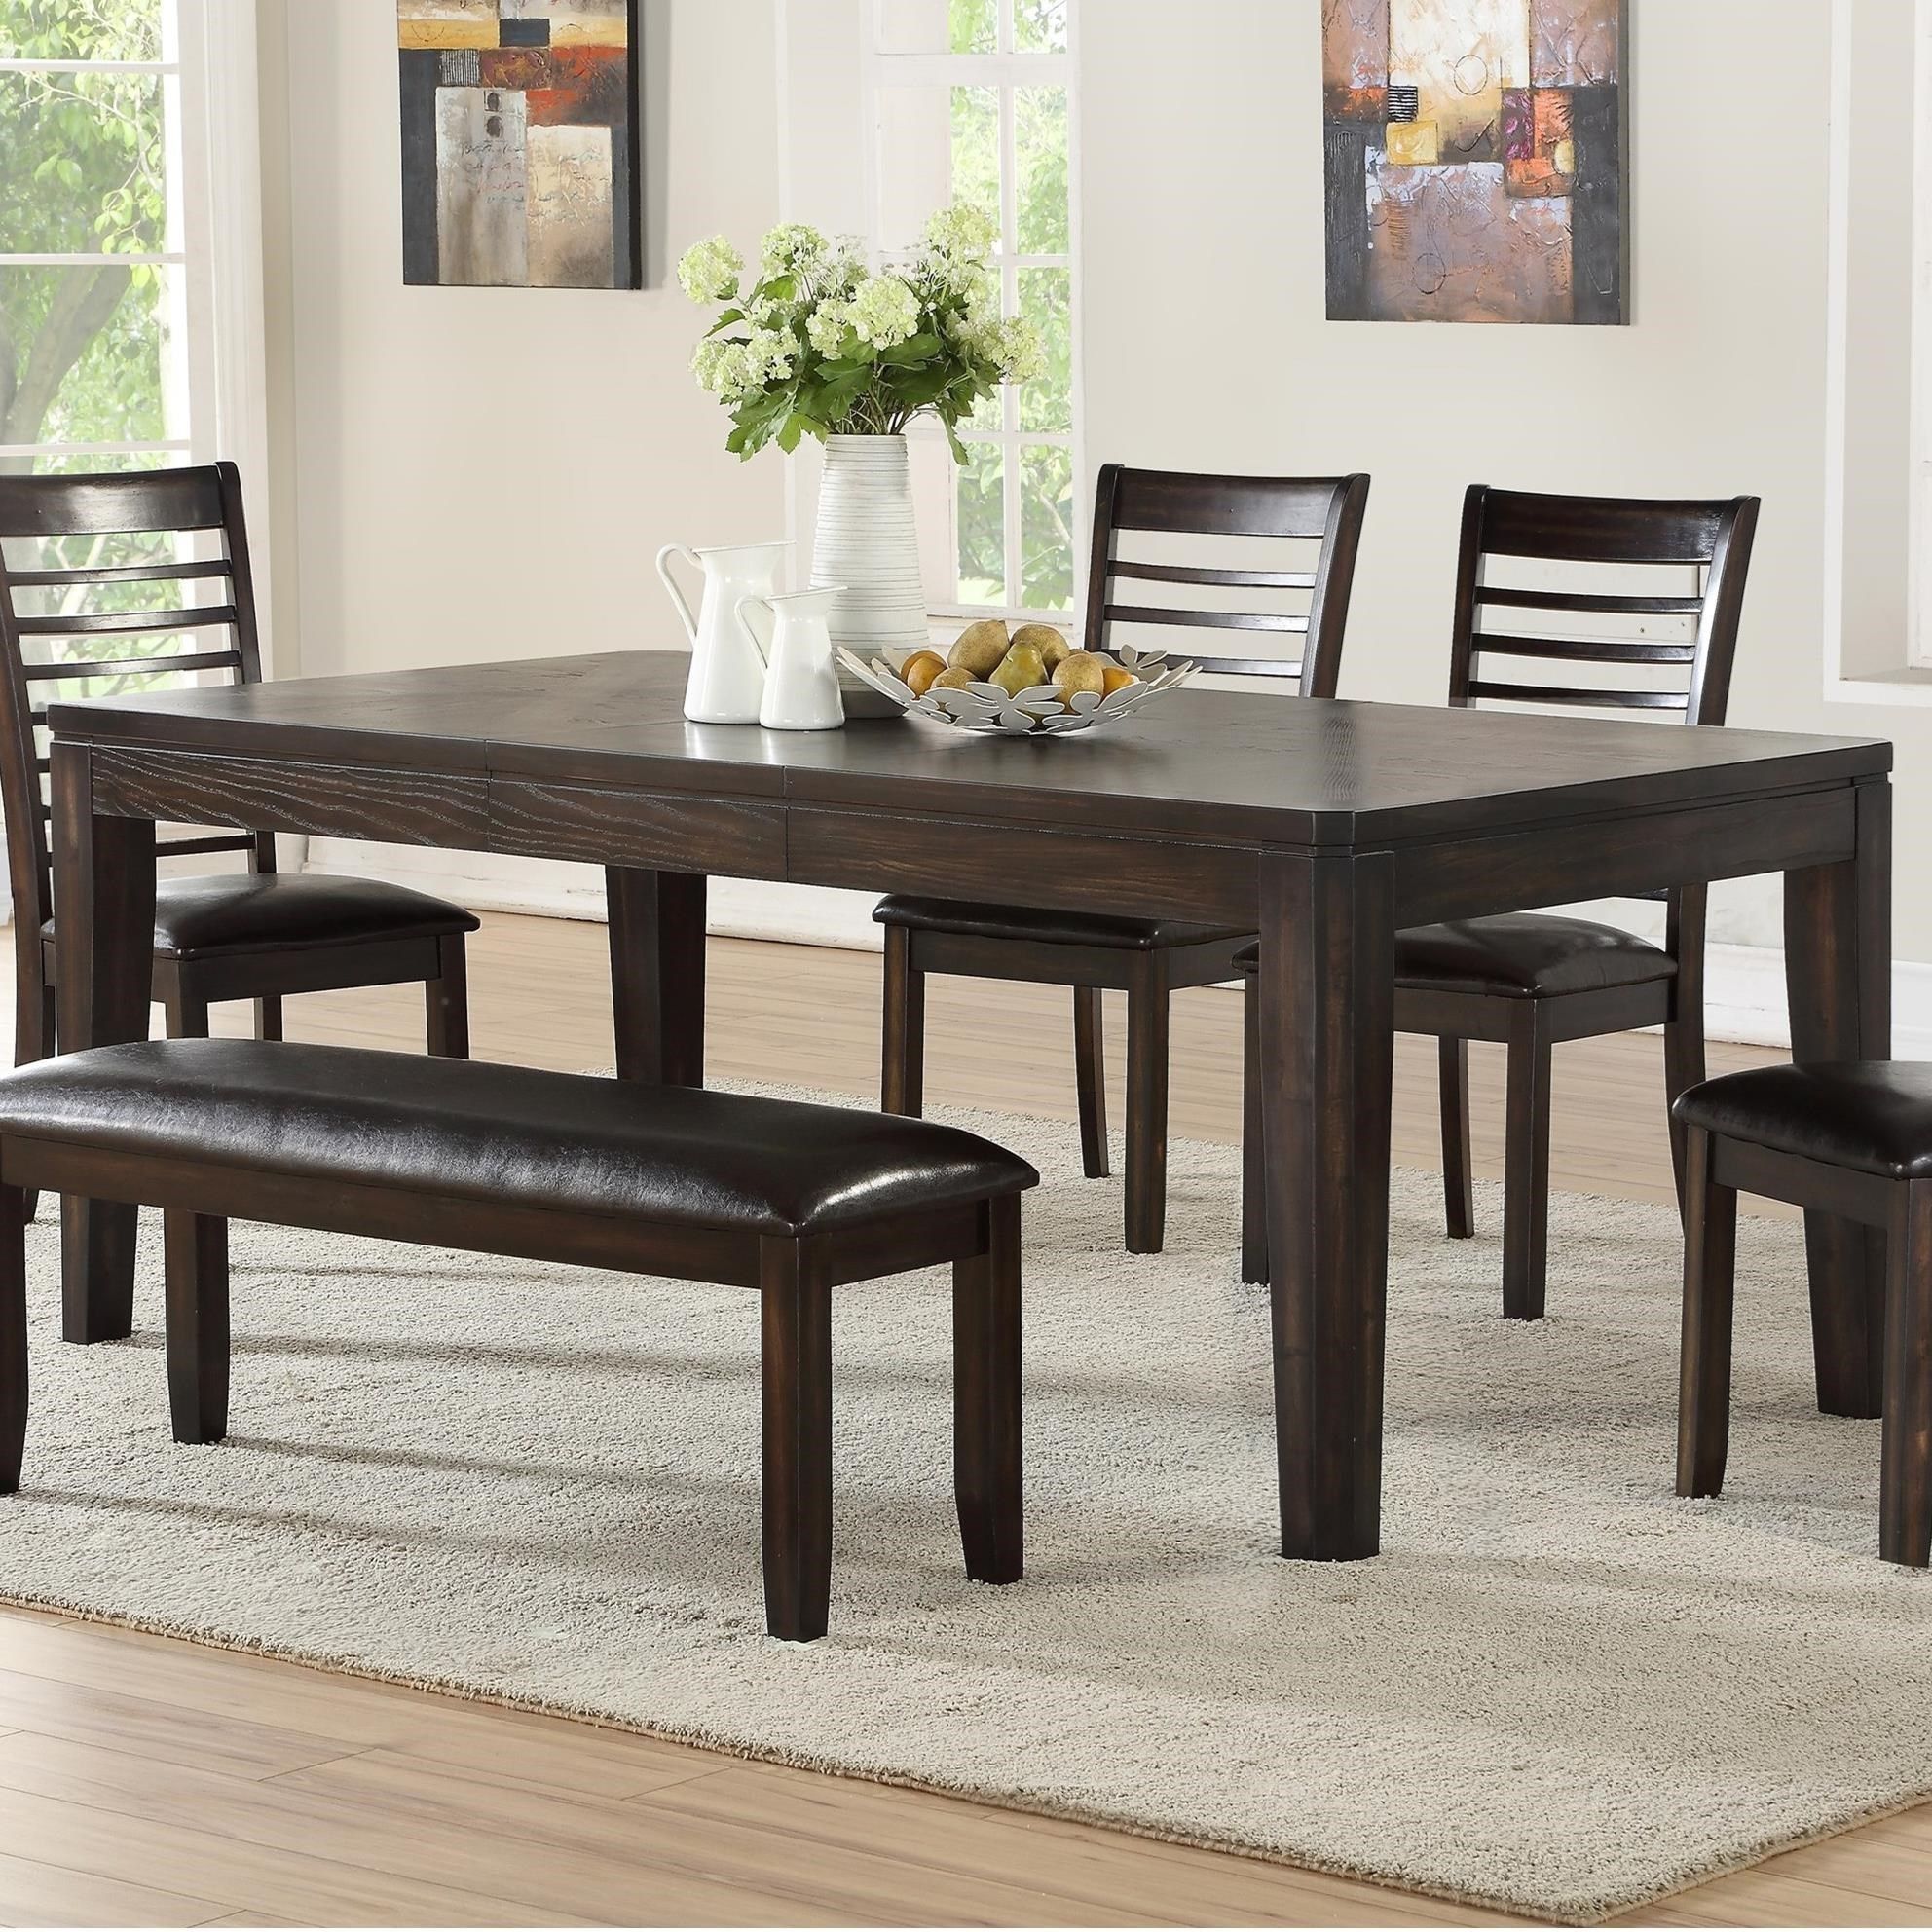 Steve Silver Ally Dining Table With 18" Leaf | Wayside For Most Recently Released Silver Dining Tables (View 3 of 15)